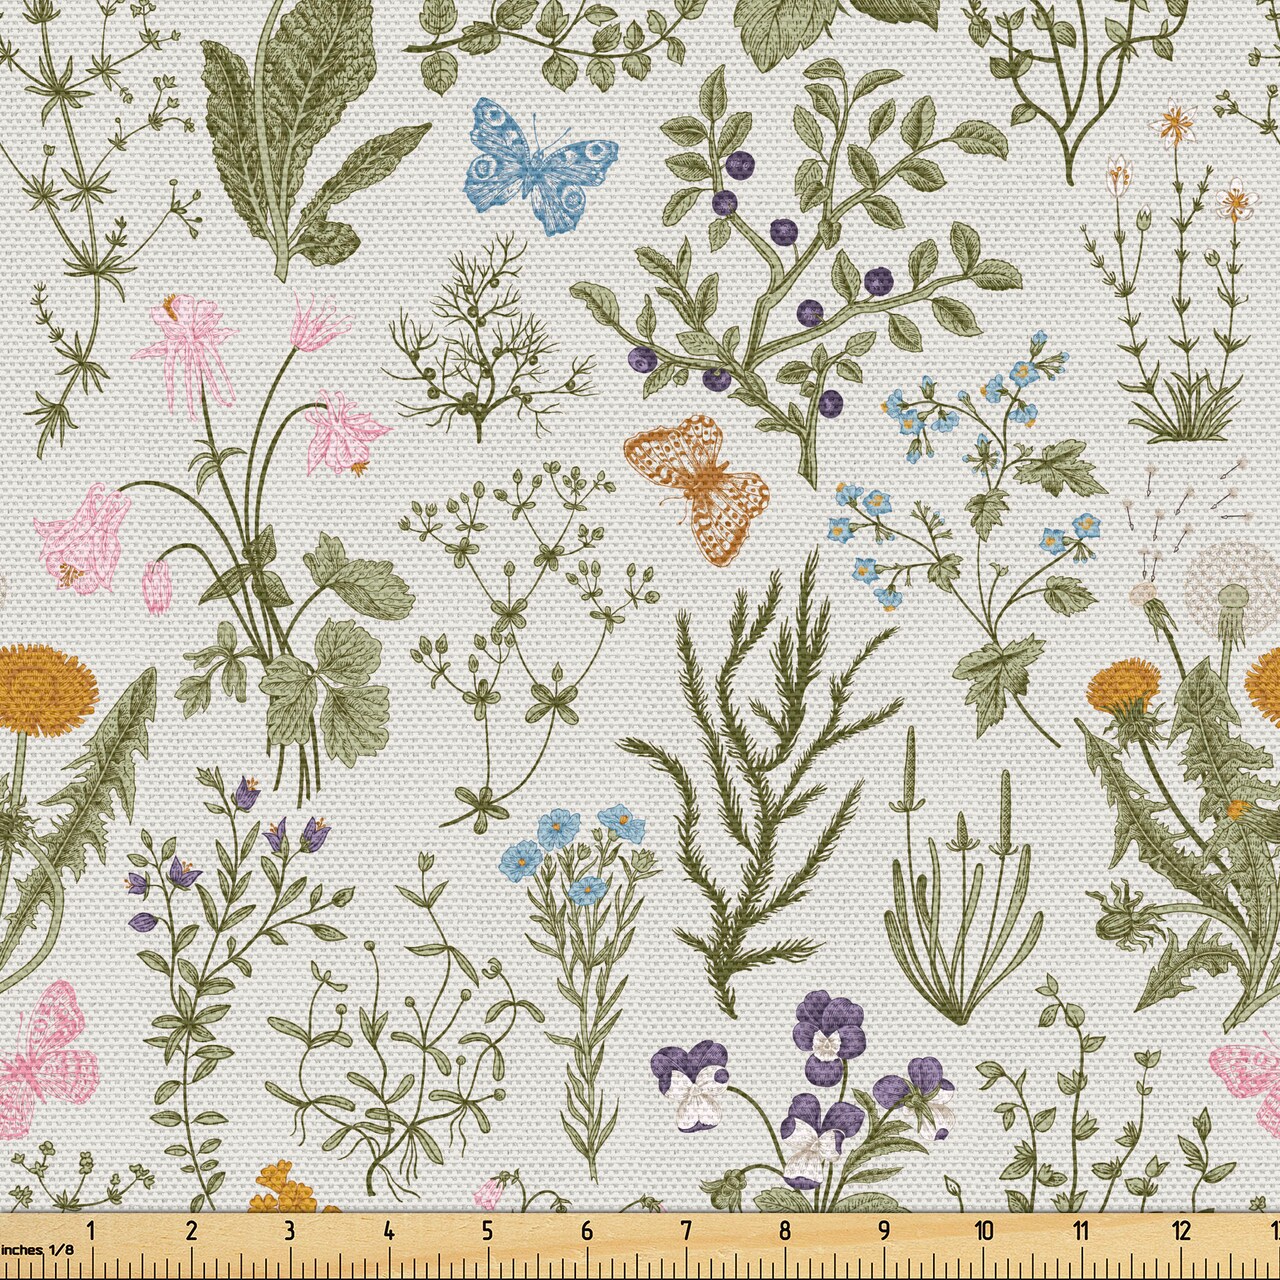 Ambesonne Floral Fabric by the Yard, Vintage Garden Plants Herbs Flowers Botanical Classic Design Art, Decorative Fabric for Upholstery and Home Accents, 10 Yards, Reseda Green Beige